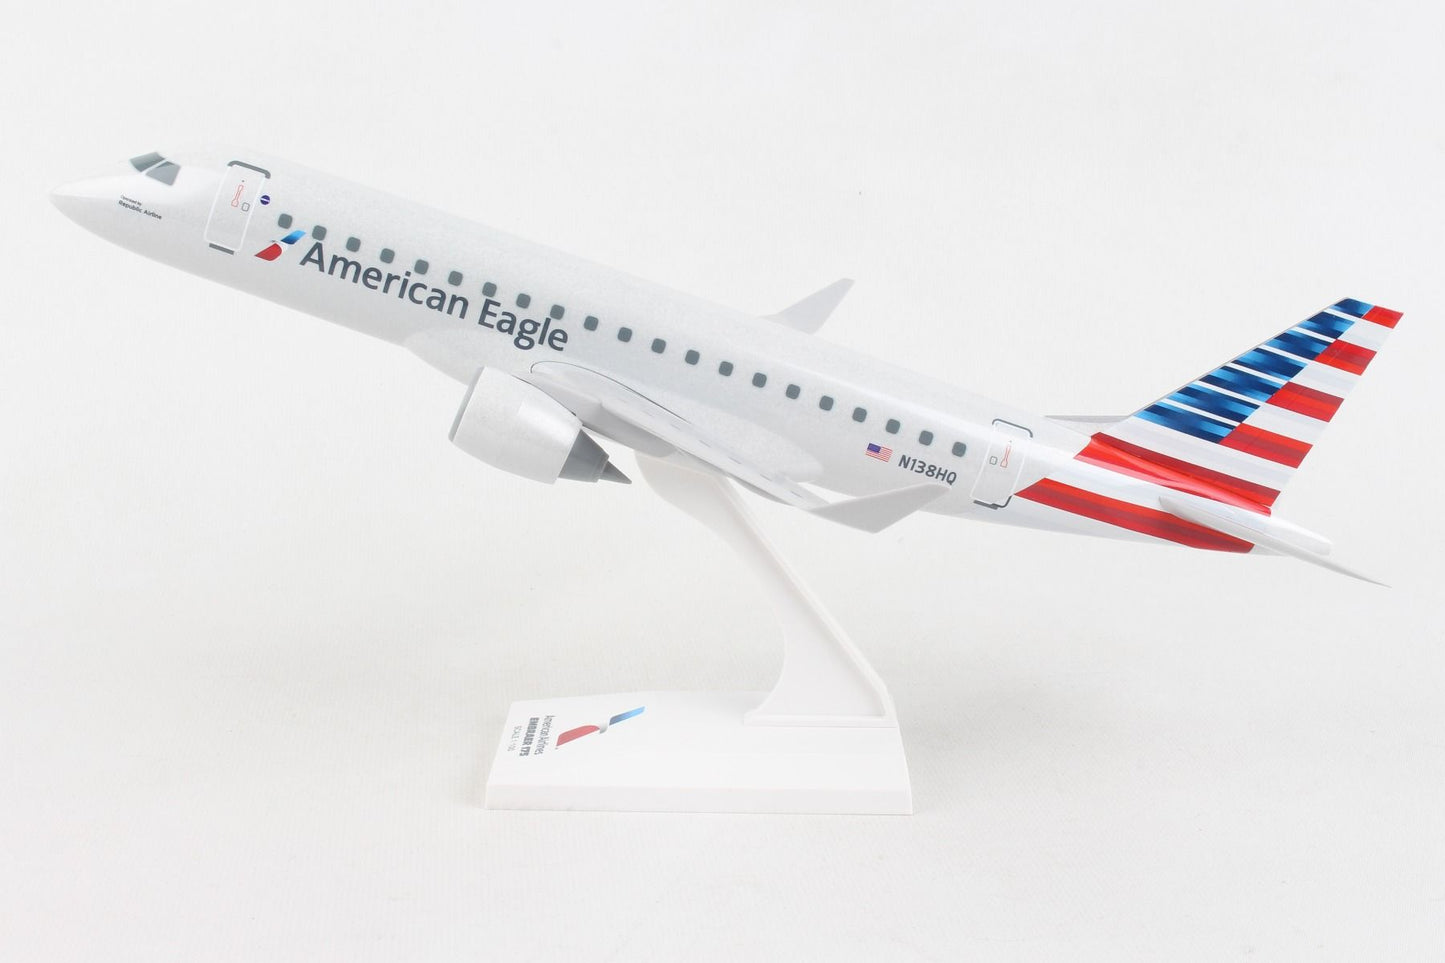 SKYMARKS AMERICAN EAGLE EMBRAER E175 1/100 NEW LIVERY REPUBL